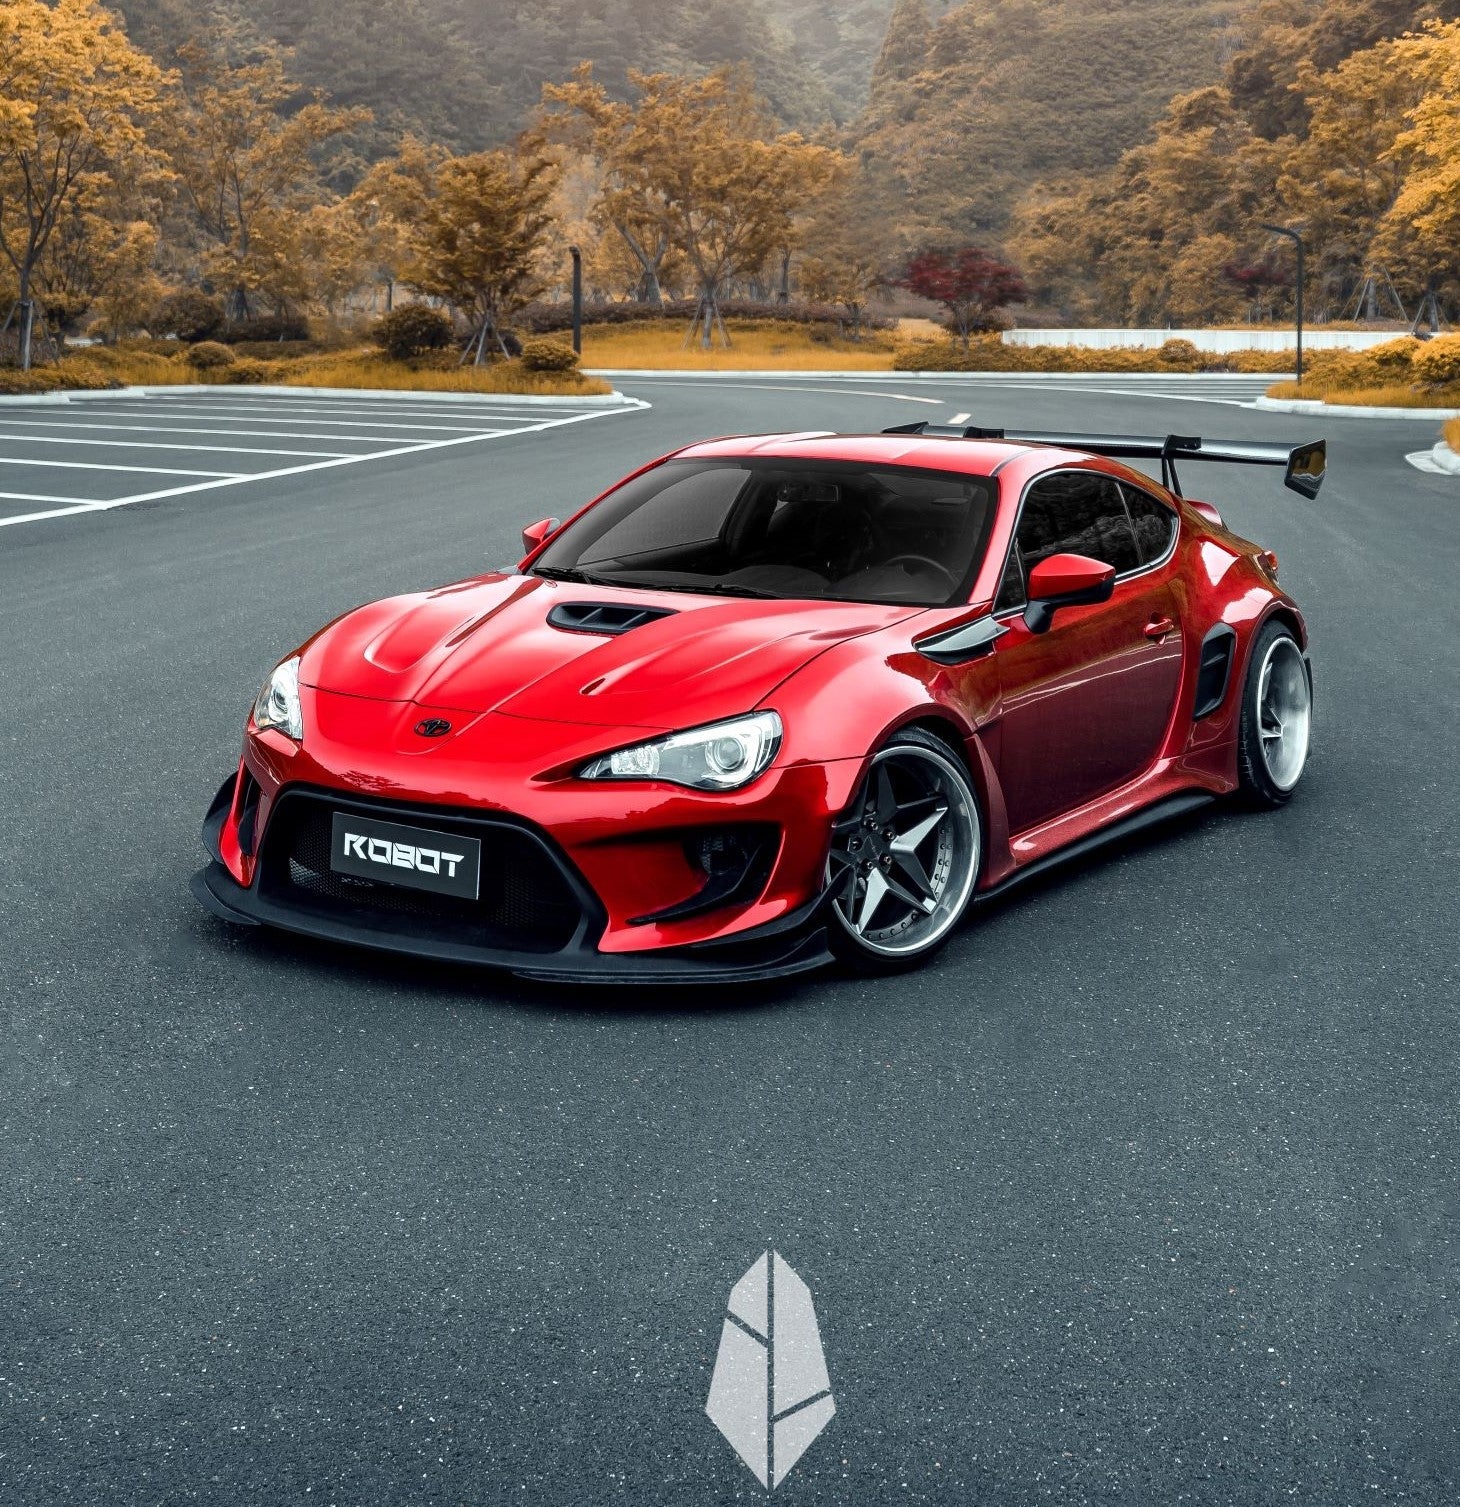 ROBOT CRAFTSMAN Wheel Arches & Fenders & Side Skirts For Toyota 86 Subaru BRZ Scion FR-S